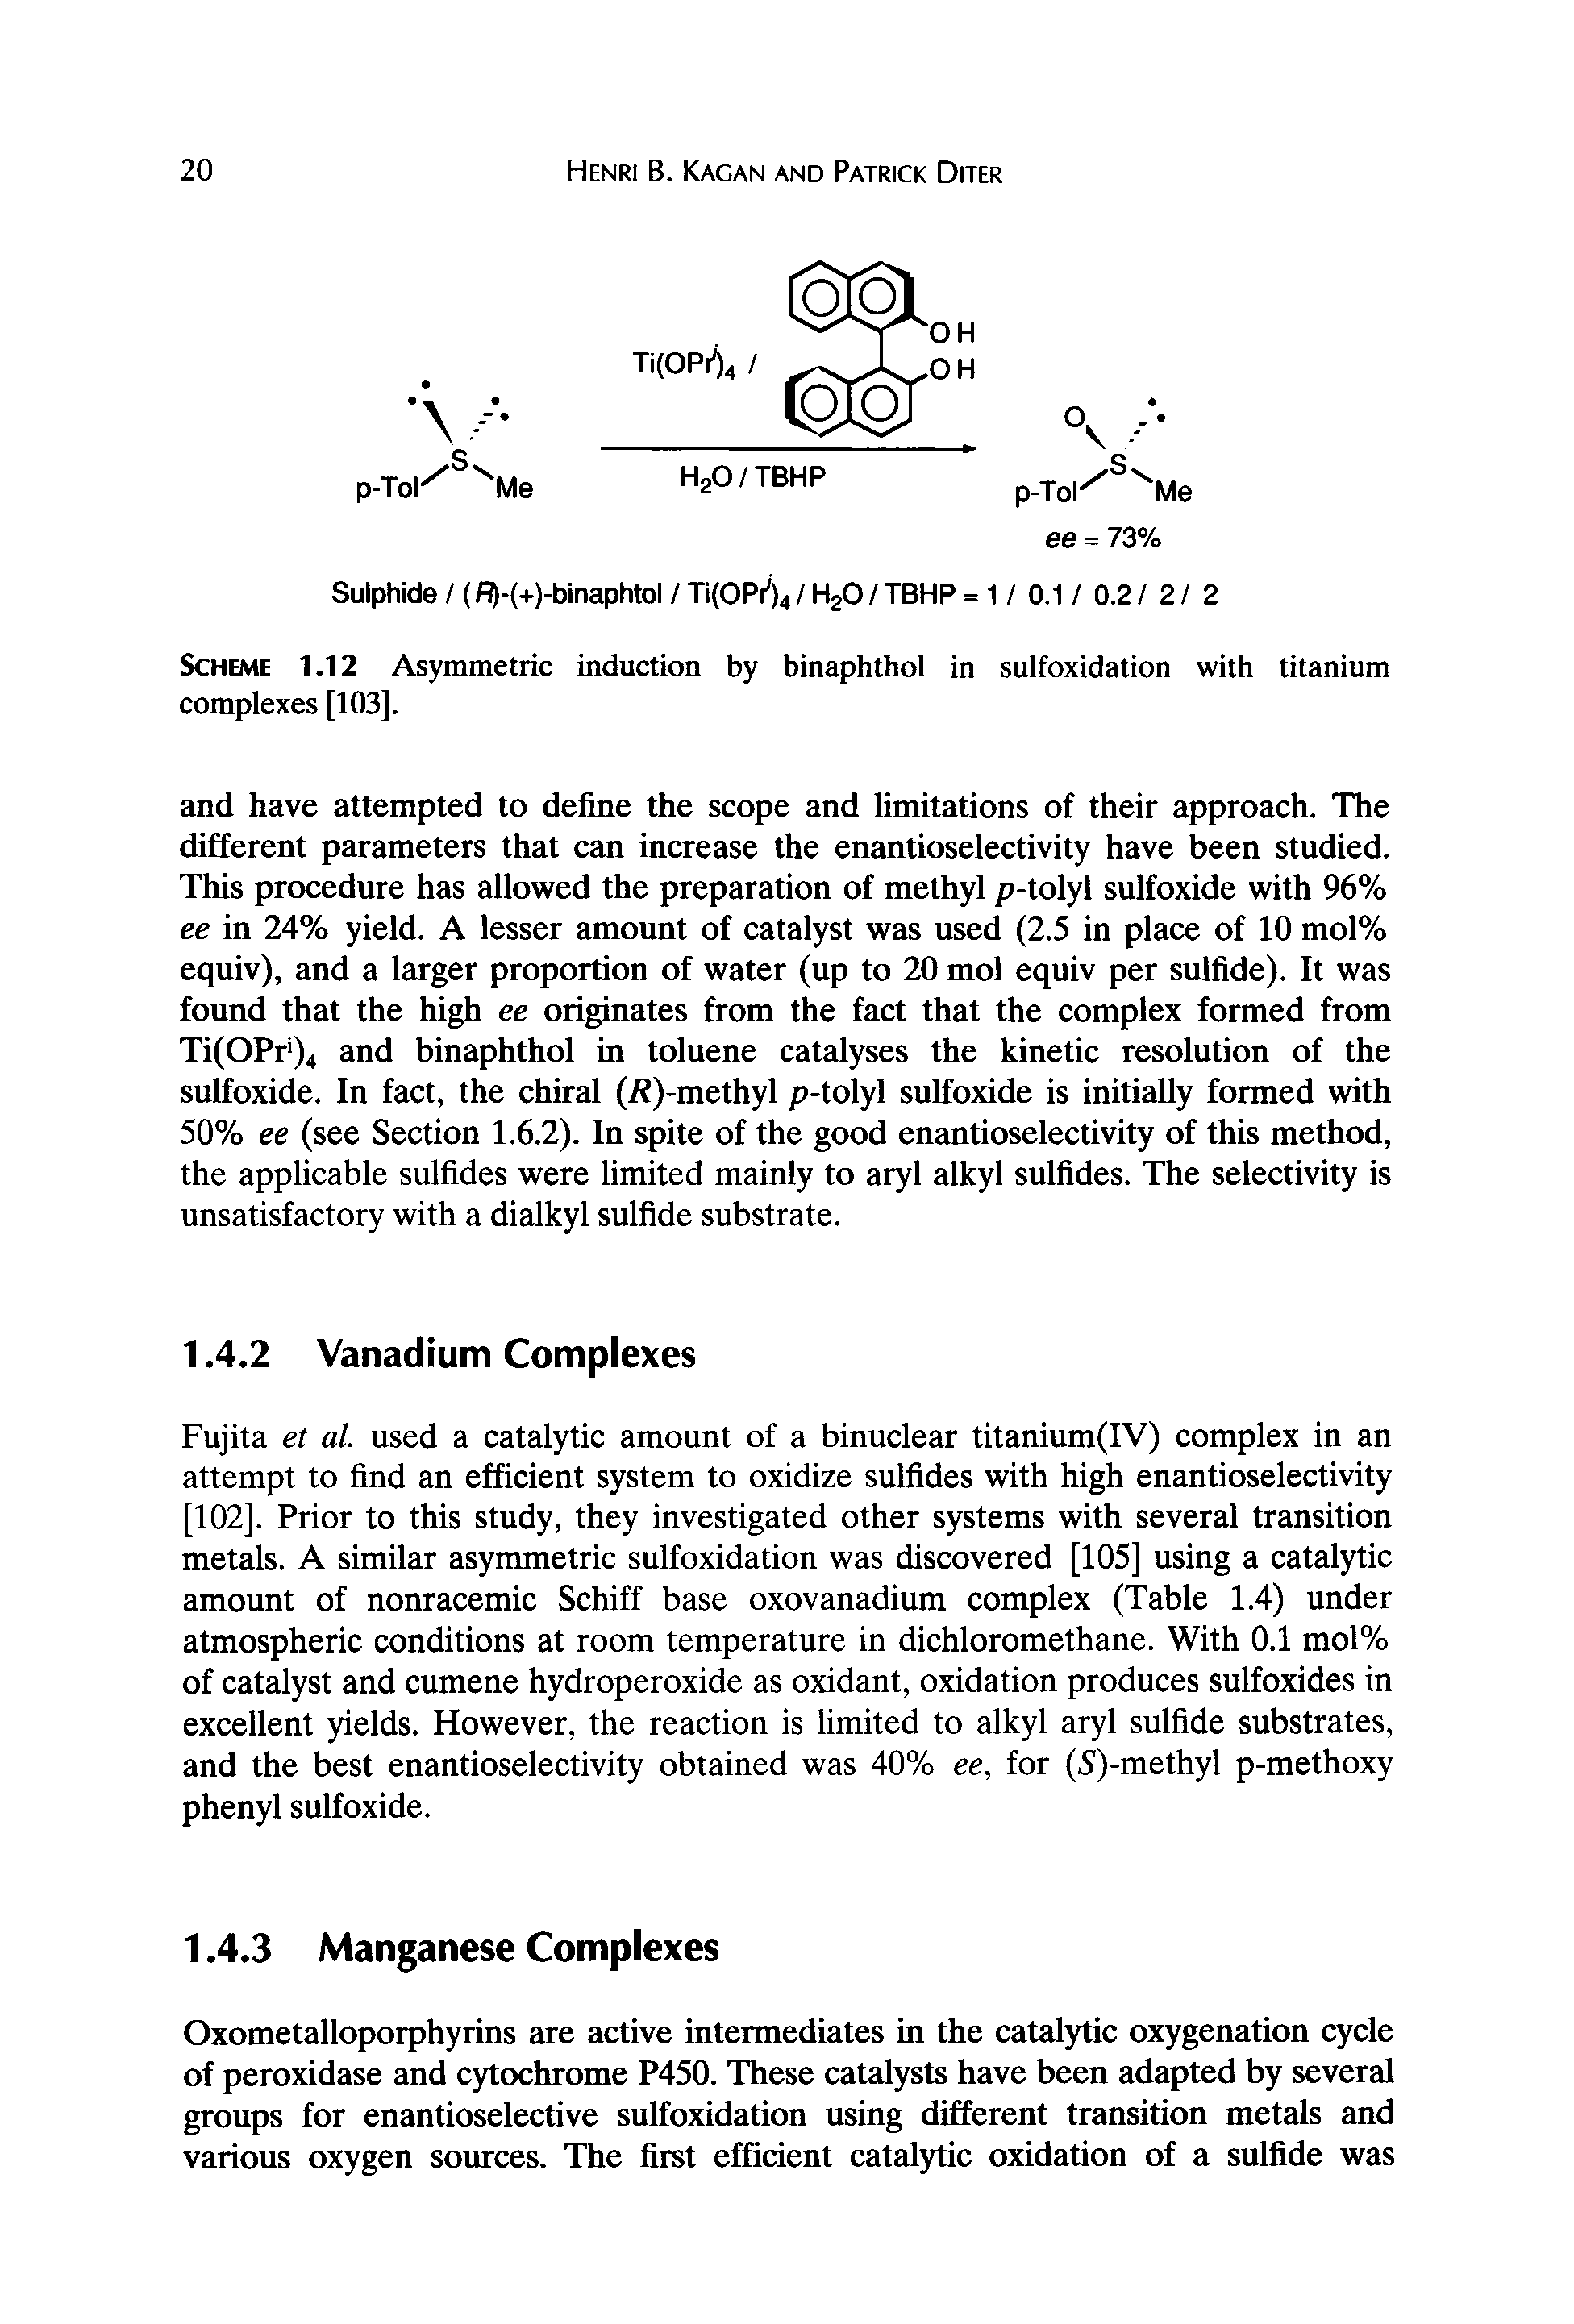 Scheme 1.12 Asymmetric induction by binaphthol in sulfoxidation with titanium complexes [103].